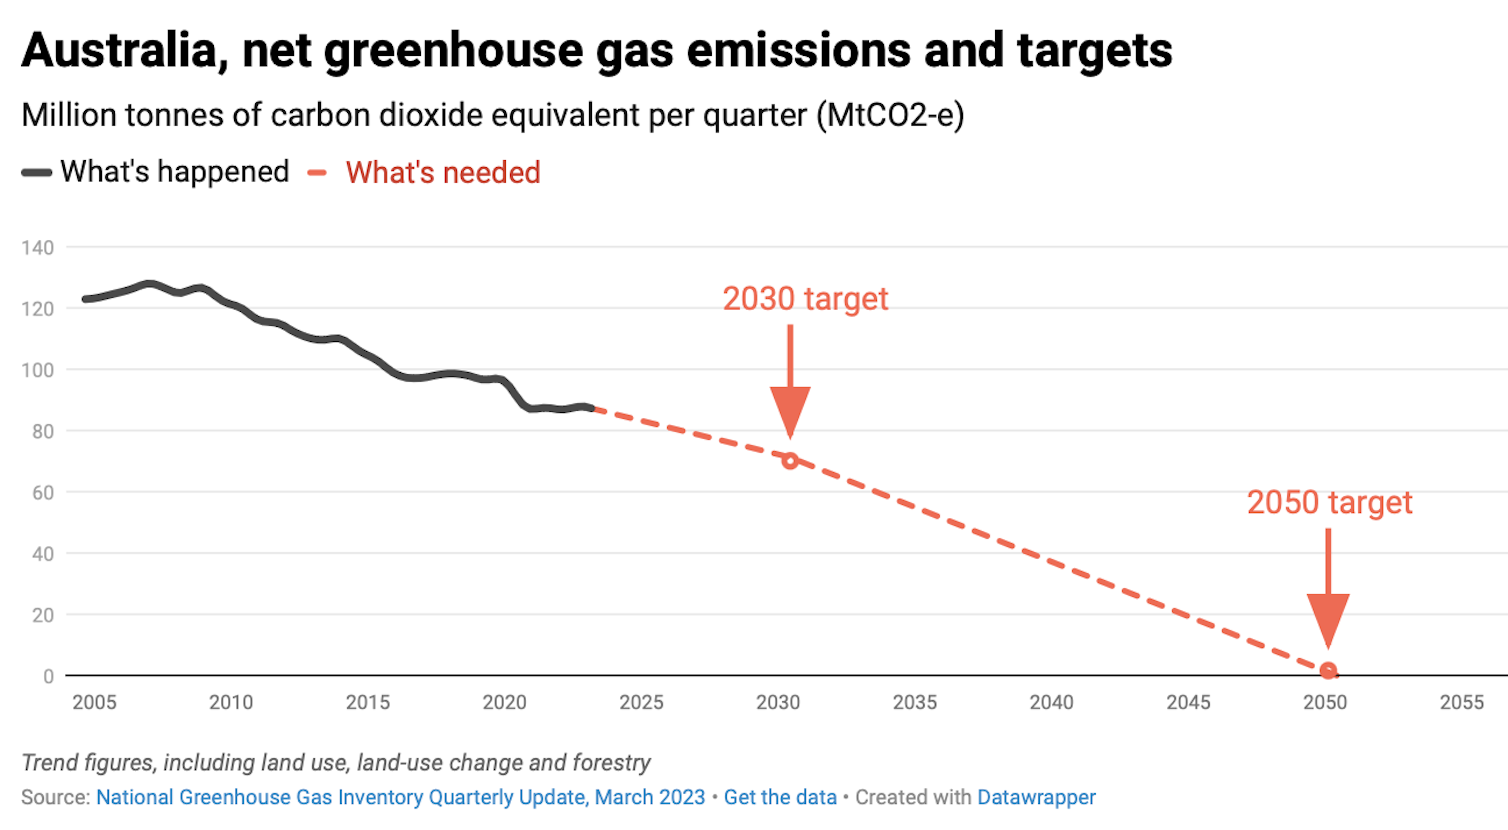 A line chart shows Australia's net greenhouse gas emissions declining from 2005 to the present, but still nowhere near targets for 2030 and 2050.